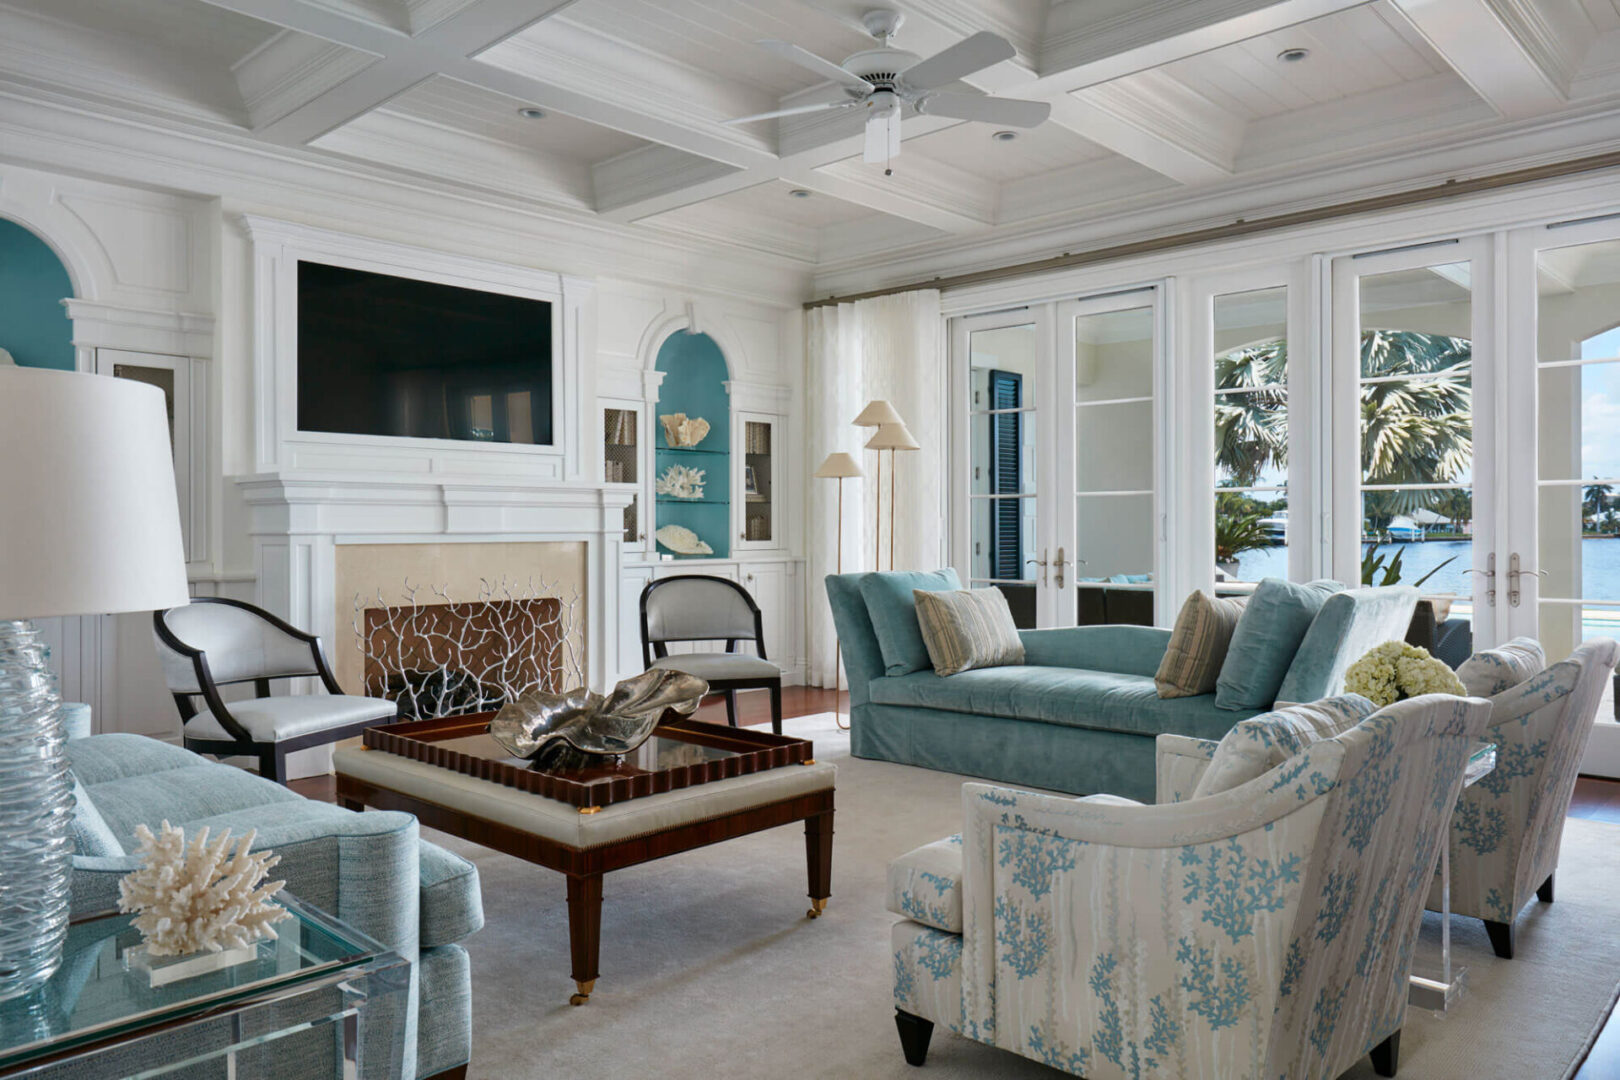 A living room with white walls and blue furniture.